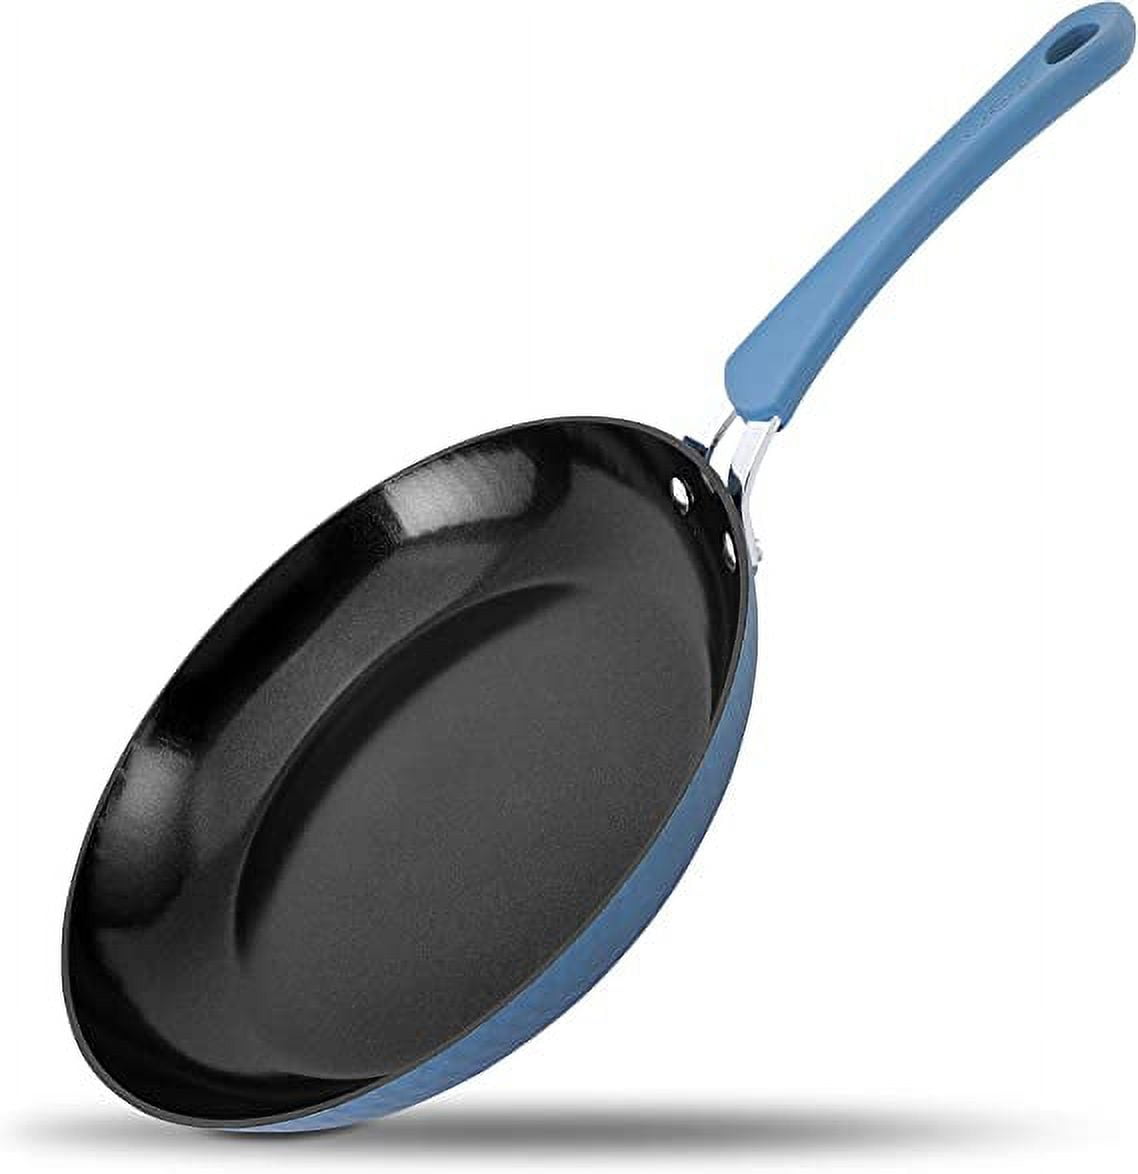 Nutrichef 14 in. Ceramic Non-Stick Frying Pan in Blue with Lid